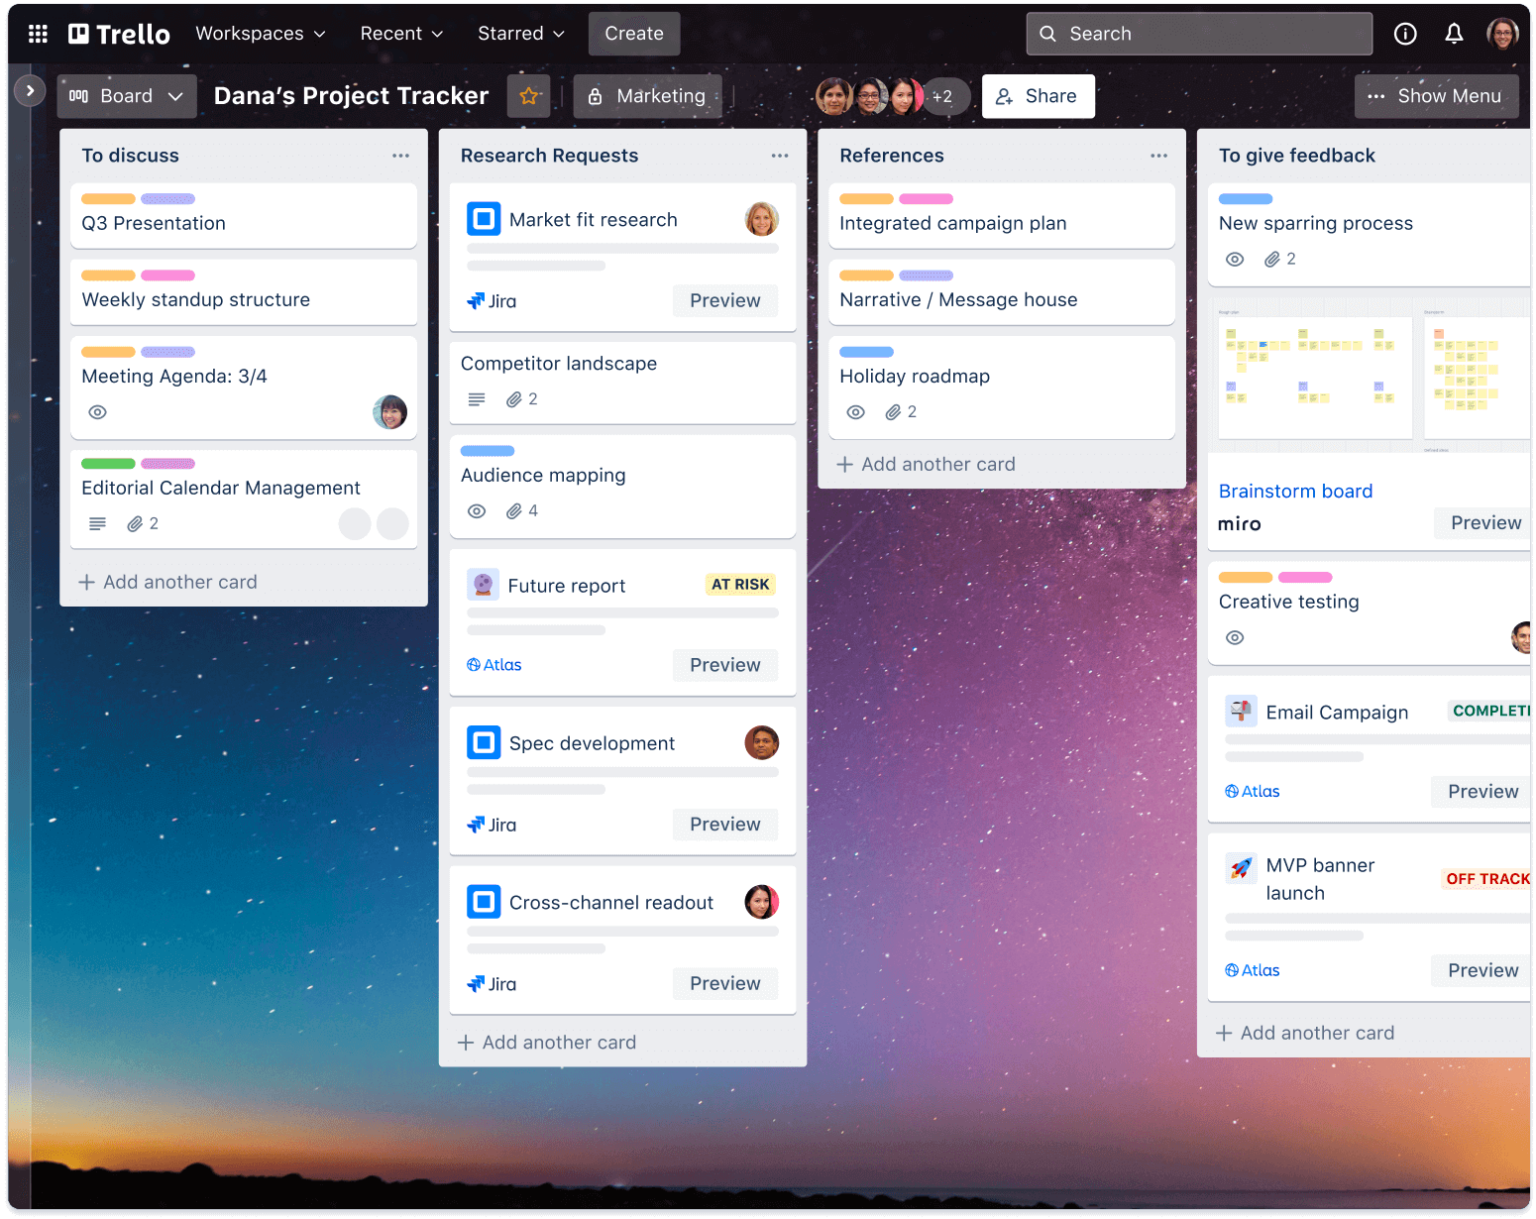 Remote Work and Distributed Teams: 4 Insights into the Future of Flexible Work - Trello